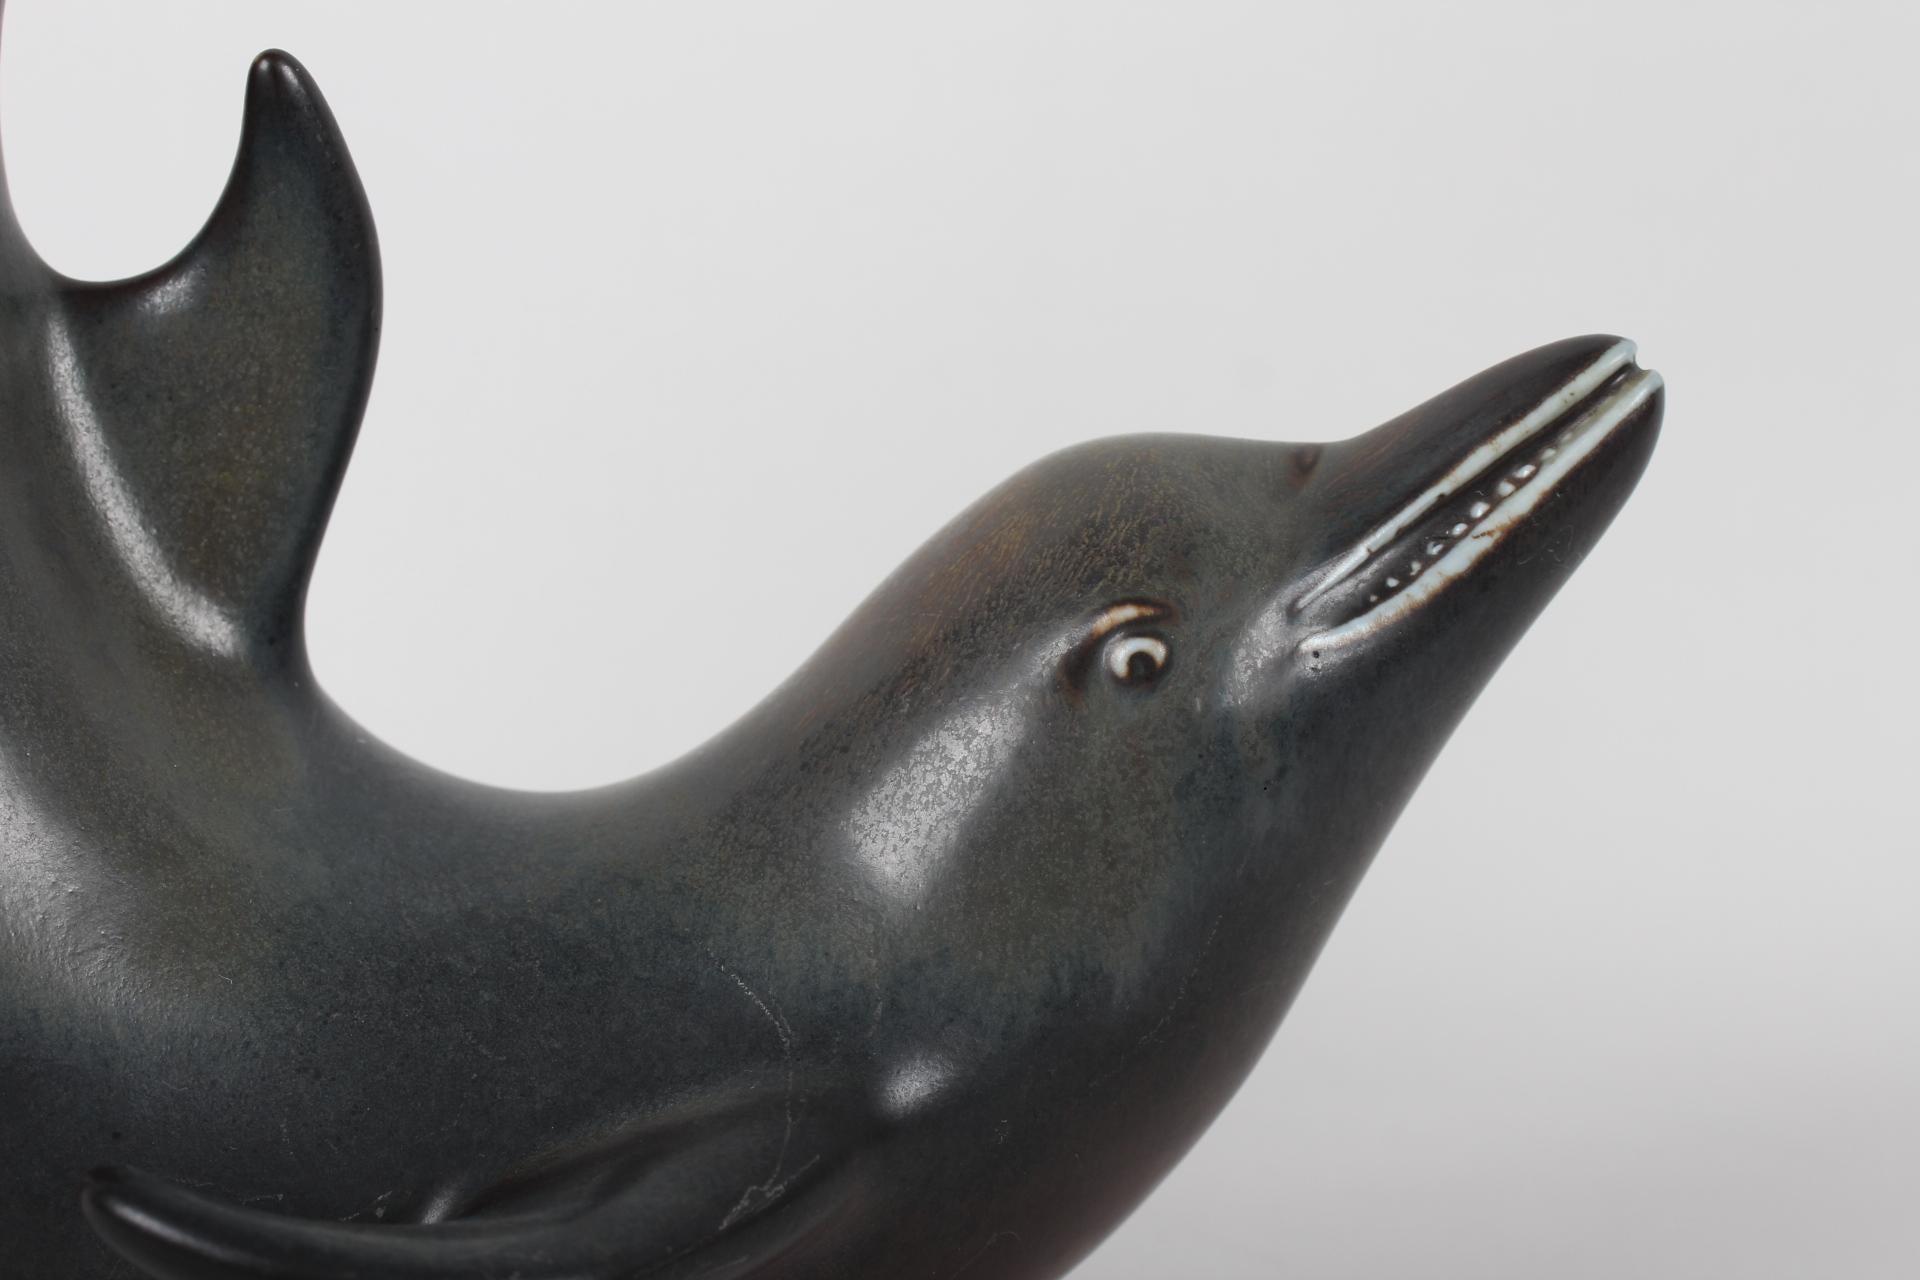 Rare ceramic figurine/sculpture of a dolphin with dark glaze, designed by Danish ceramist Gunnar Nylund and made by Rörstand, Sweden

The figurine is signed with the monogram GN for Gunnar Nylund and Rörstrand, Sweden

Measures: Height 24